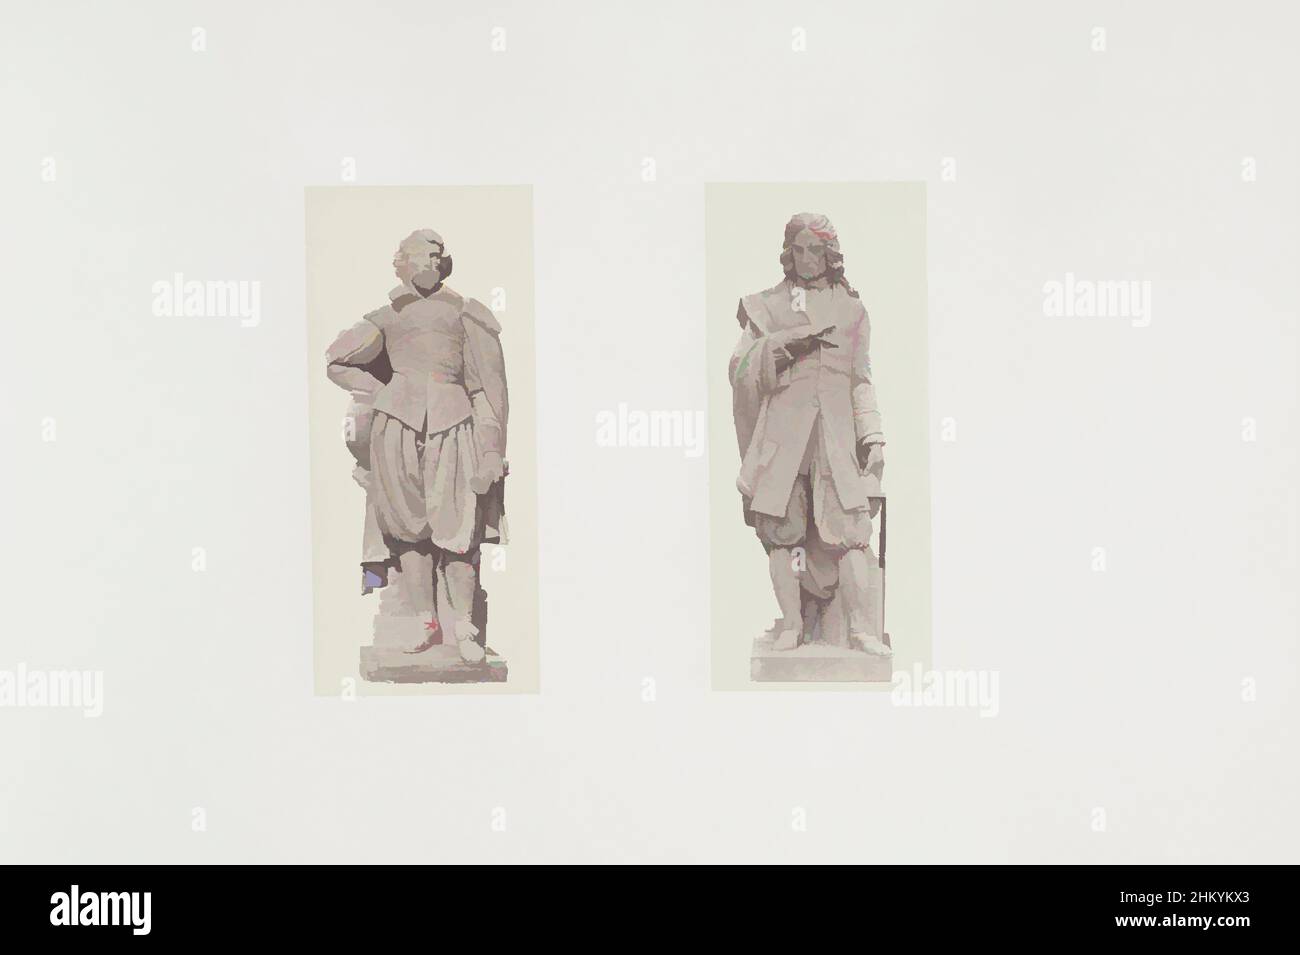 Art inspired by Plaster models for sculptures at the Palais du Louvre: left De Brosse by Auguste Ottin and right Cassini by Hippolyte Maindron, Part of Réunion des Tuileries au Louvre 1852-1857, album 2., Édouard Denis Baldus, Auguste Ottin, Paris, c. 1855 - c. 1857, paper, salted paper, Classic works modernized by Artotop with a splash of modernity. Shapes, color and value, eye-catching visual impact on art. Emotions through freedom of artworks in a contemporary way. A timeless message pursuing a wildly creative new direction. Artists turning to the digital medium and creating the Artotop NFT Stock Photo